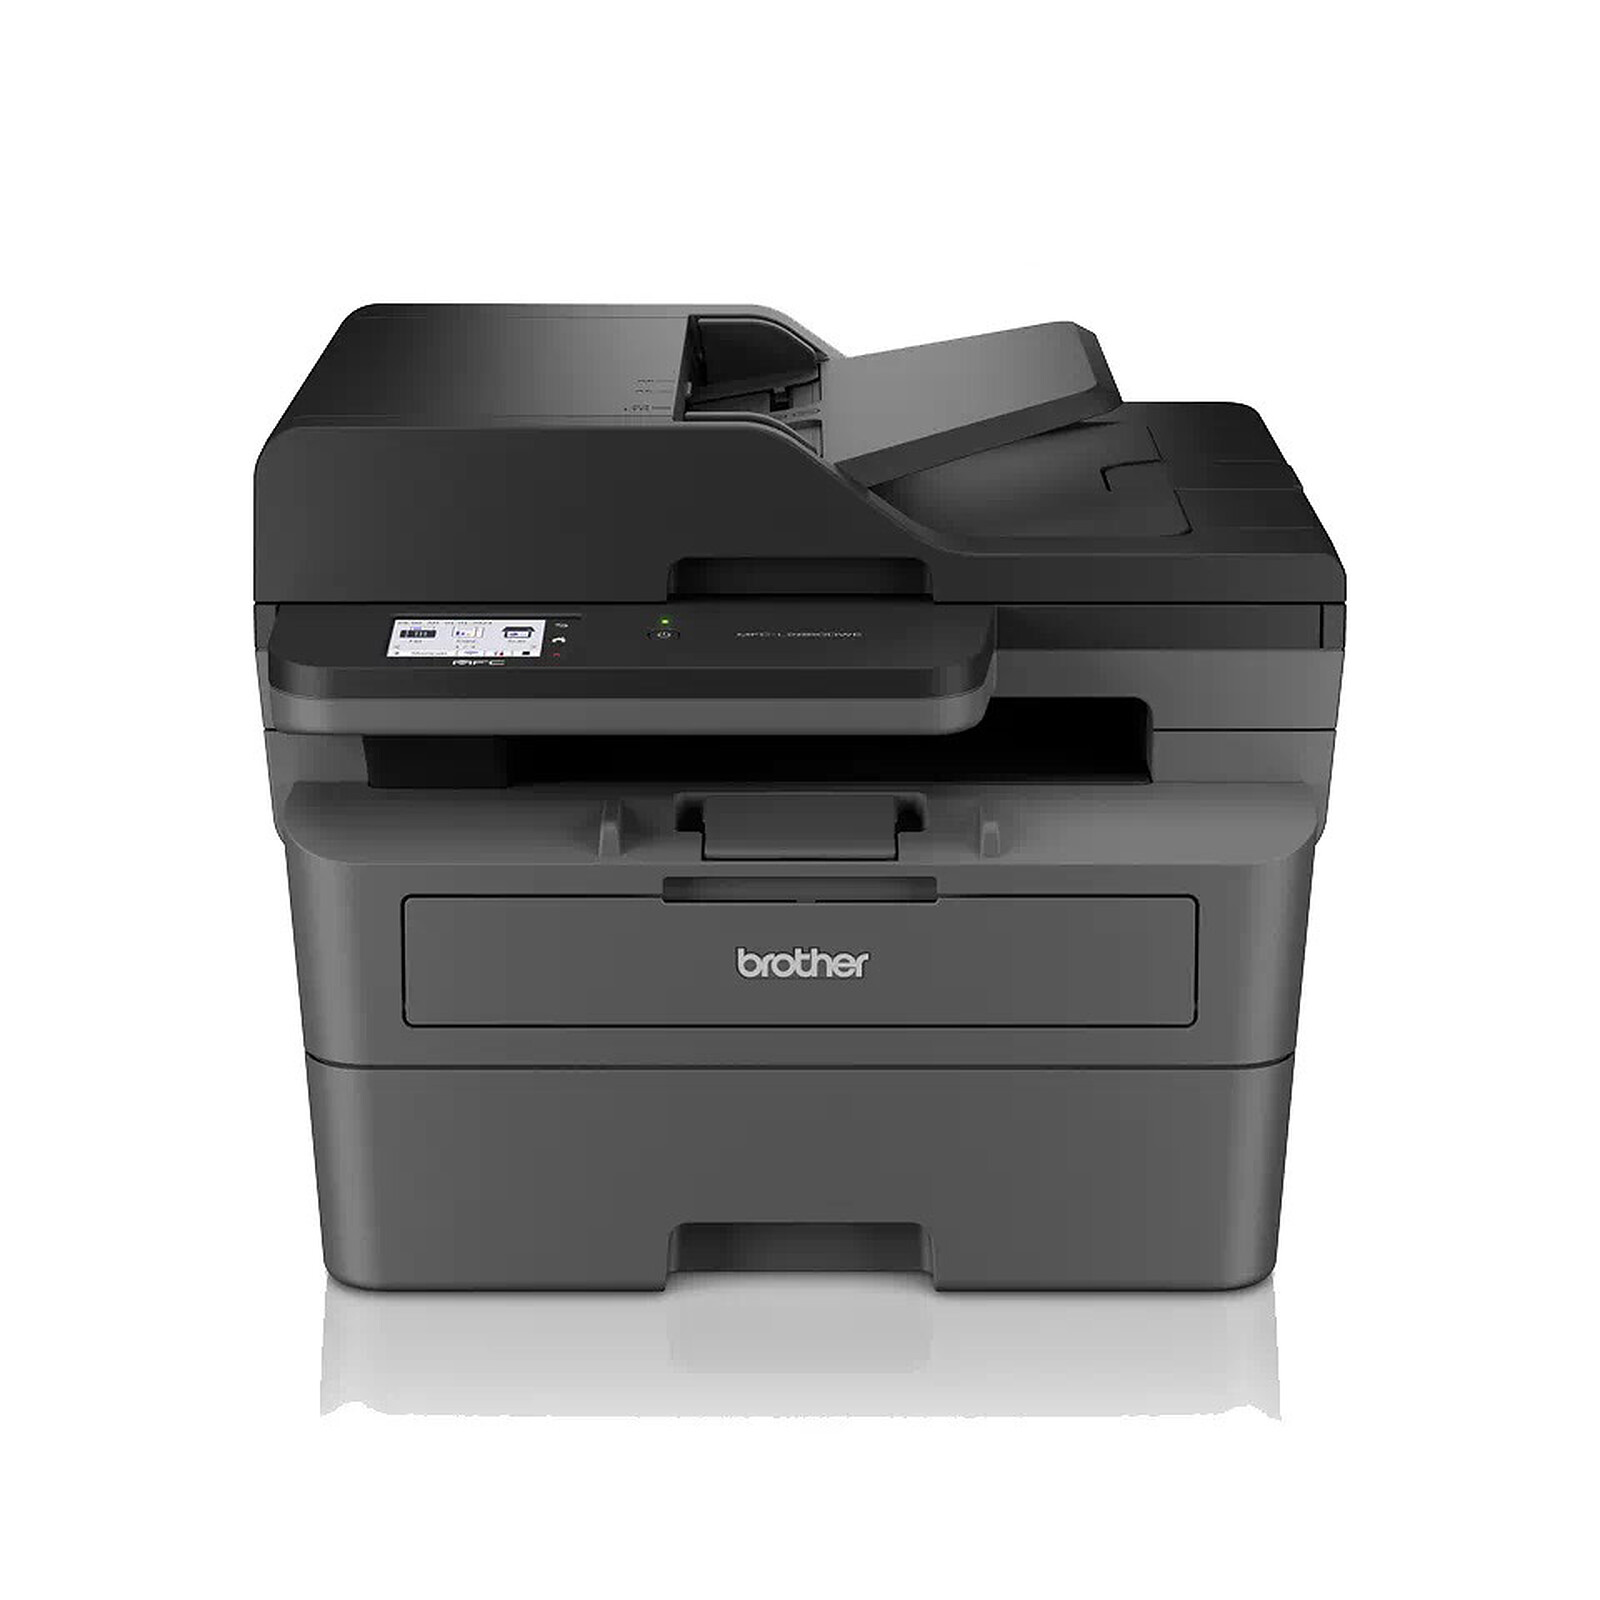 Brother MFC-L2860DWE - All-in-one printer - LDLC 3-year warranty